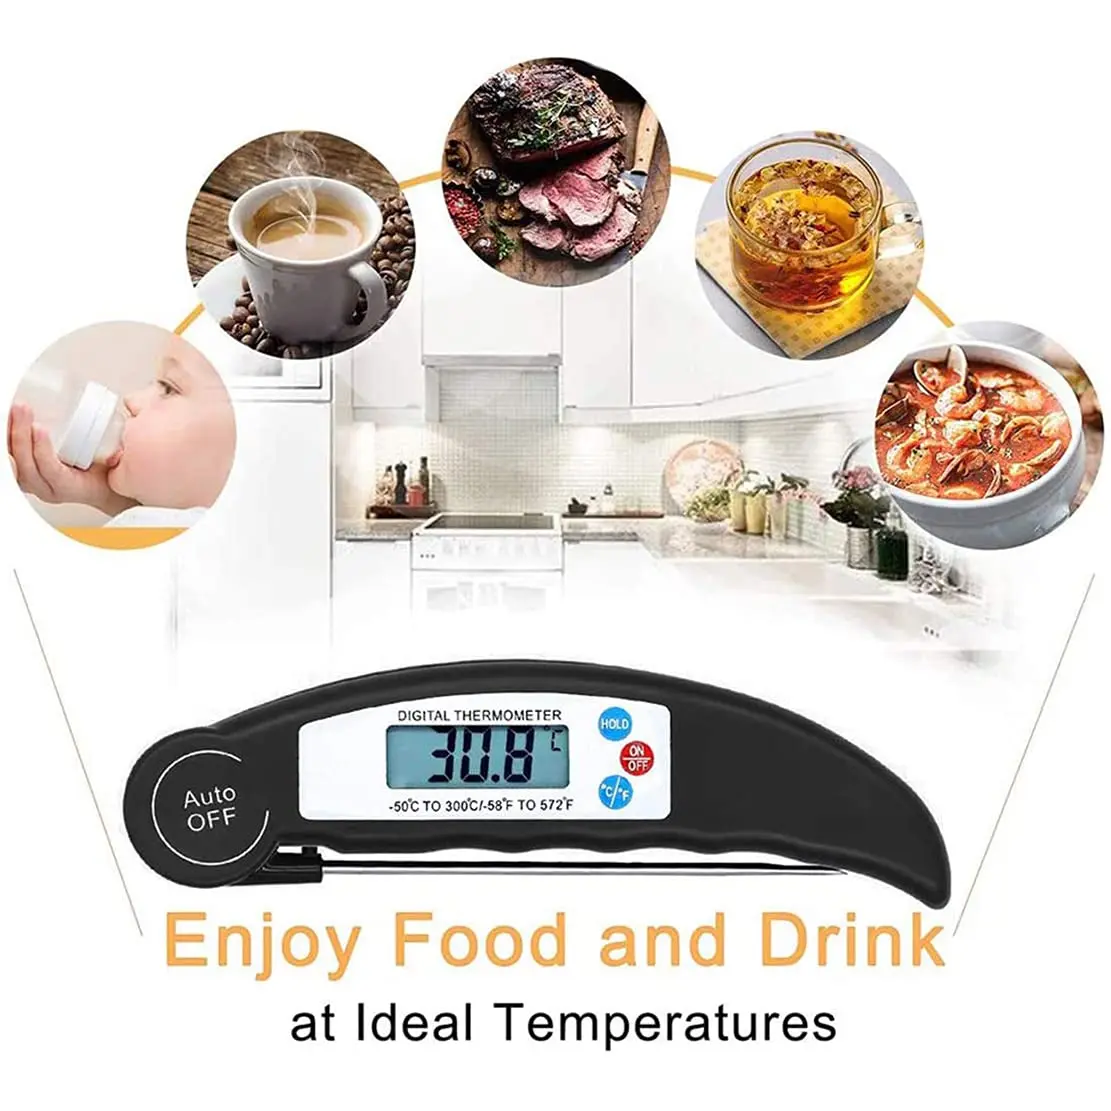 https://ae01.alicdn.com/kf/H9119a8a364364043b00bd8a6ee9502784/Digital-Thermometer-Food-Meat-Cooking-Termometer-Kitchen-Tools-BBQ-Grill-Smoker-Instant-Read-Thermometer-For-Kitchen.jpg